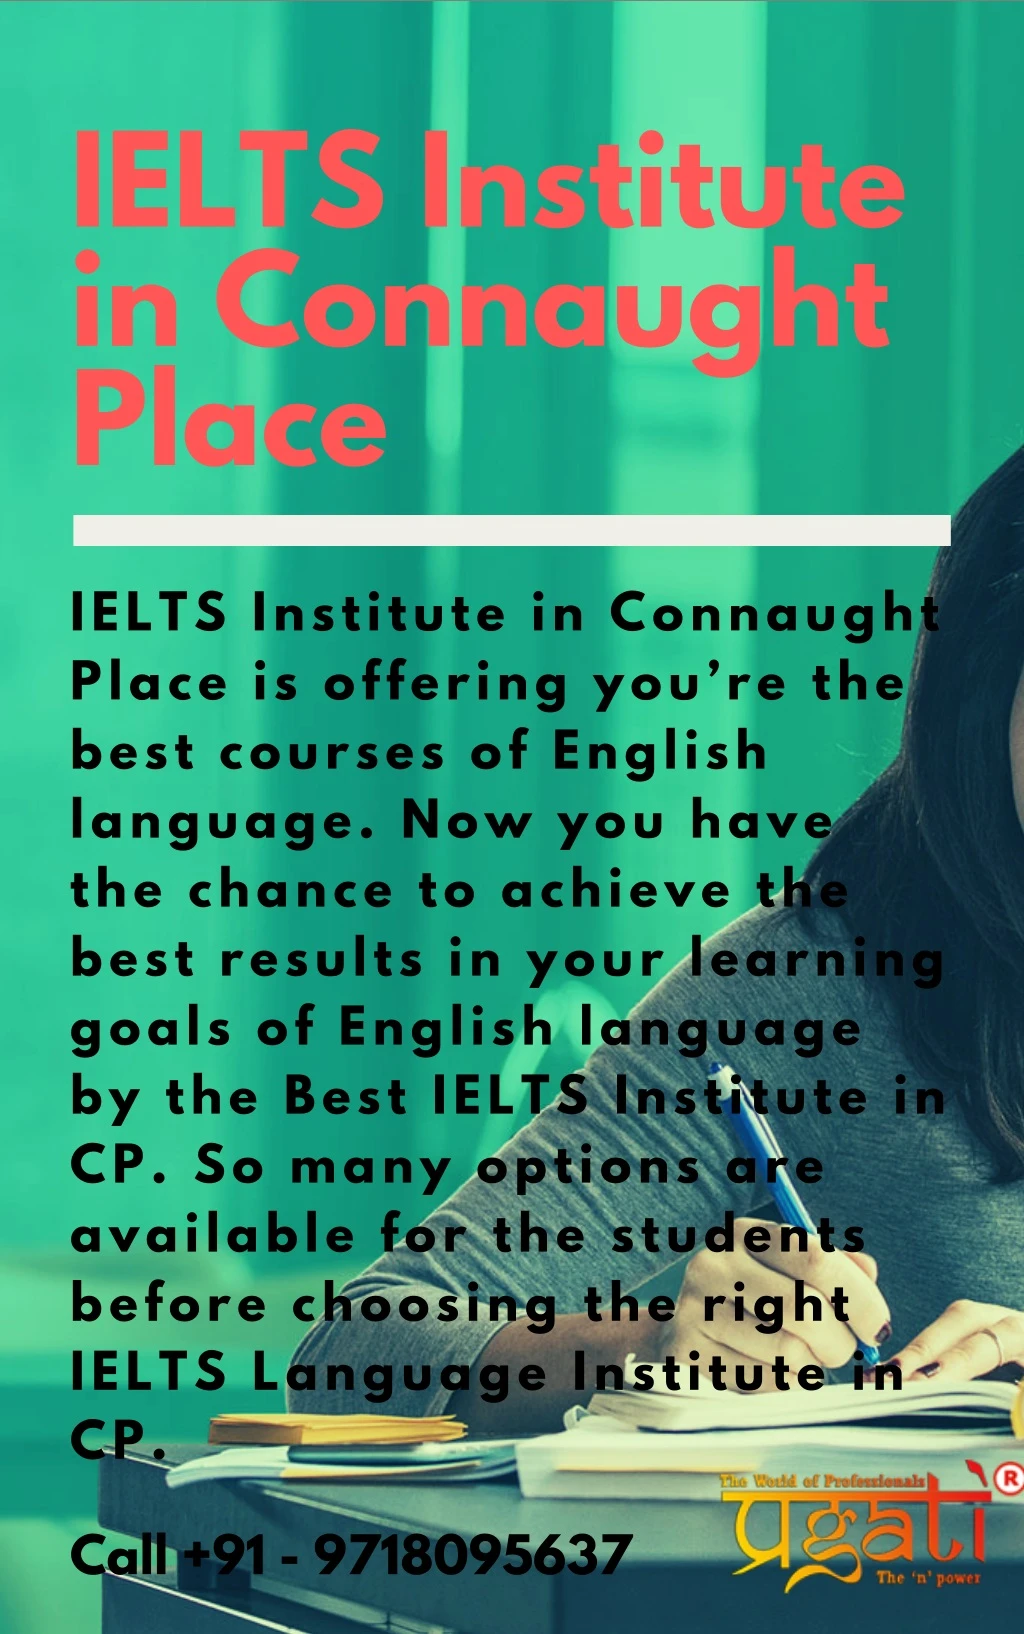 ielts institute in connaught place